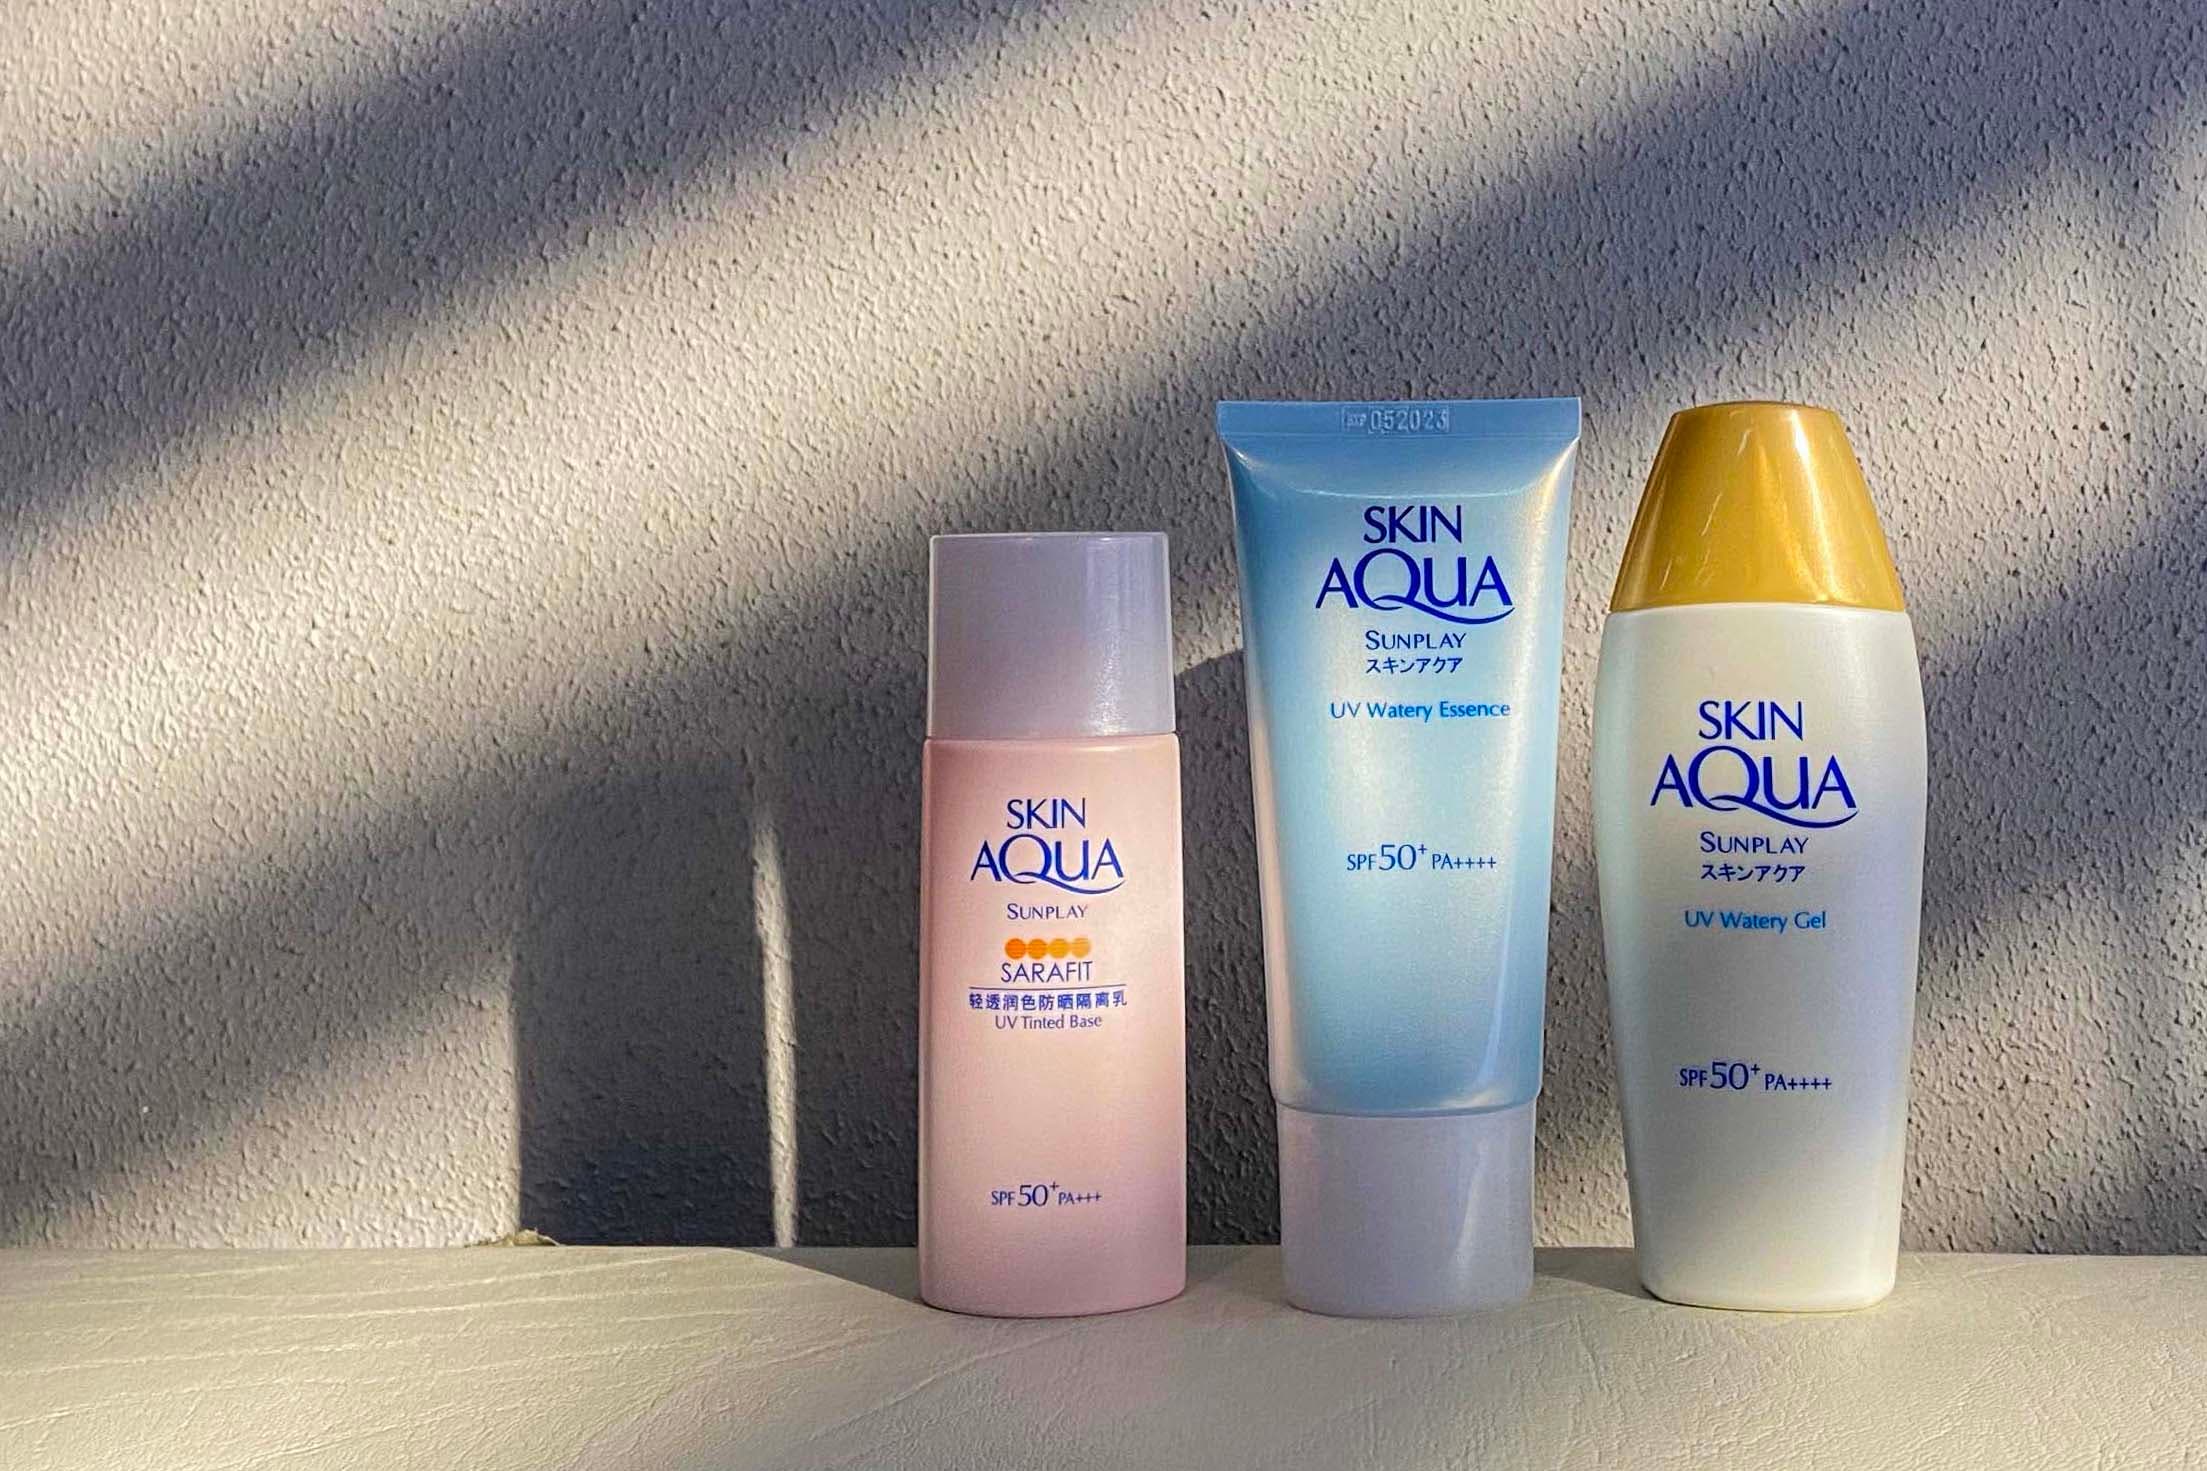 Sunplay Skin Aqua Gives You the UVA/UVB Protection that You Need